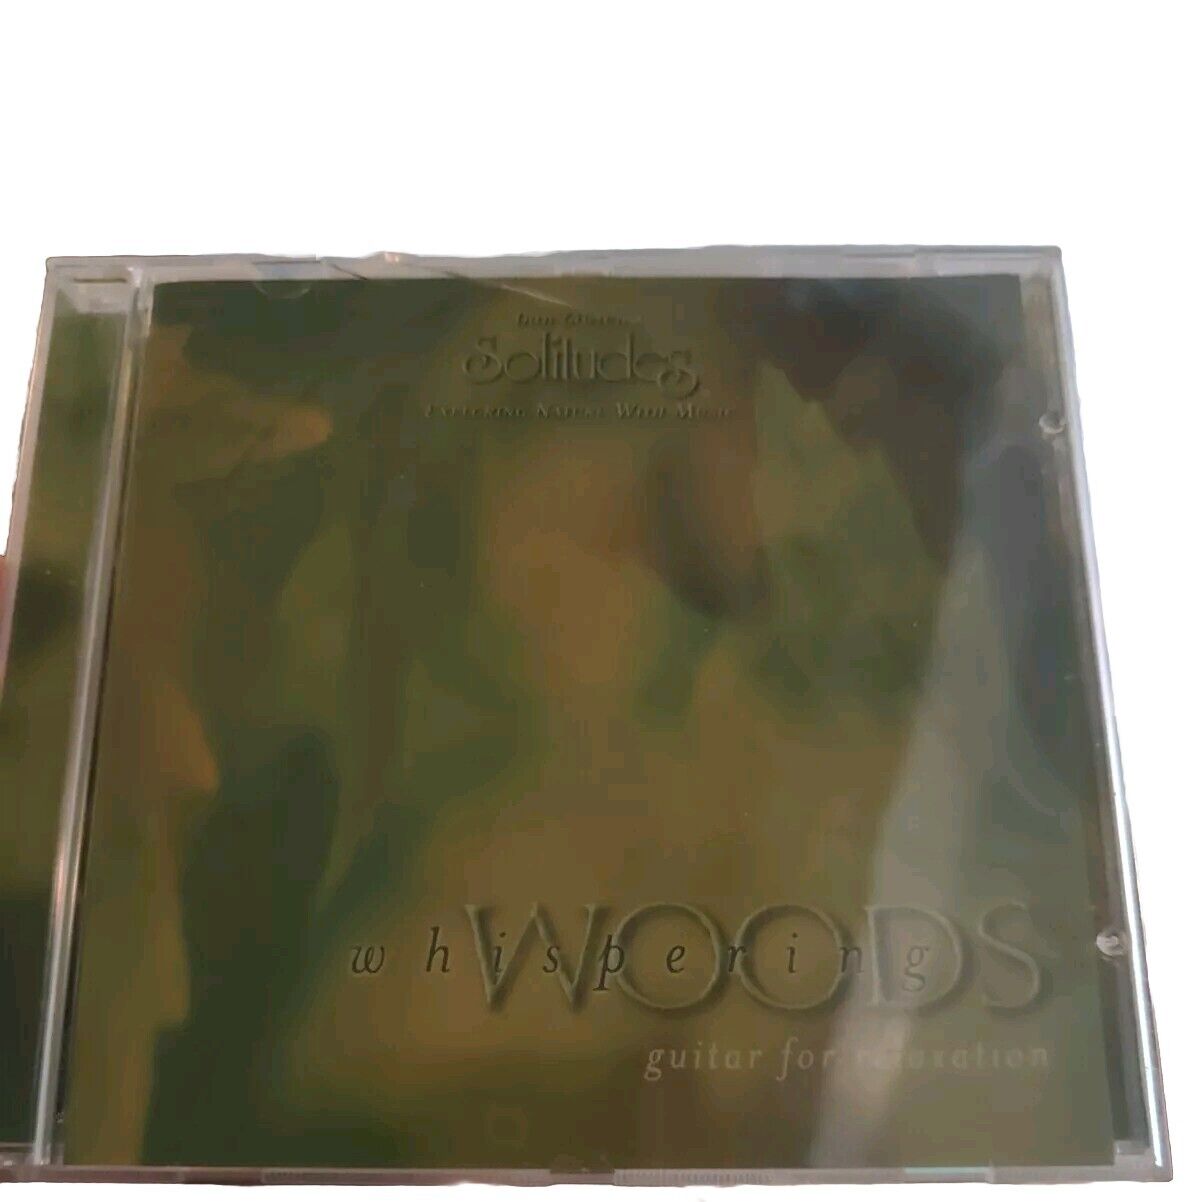 Whispering Woods by Dan Gibson (CD, Jun-2008, Solitudes) Relaxation Guitar Music